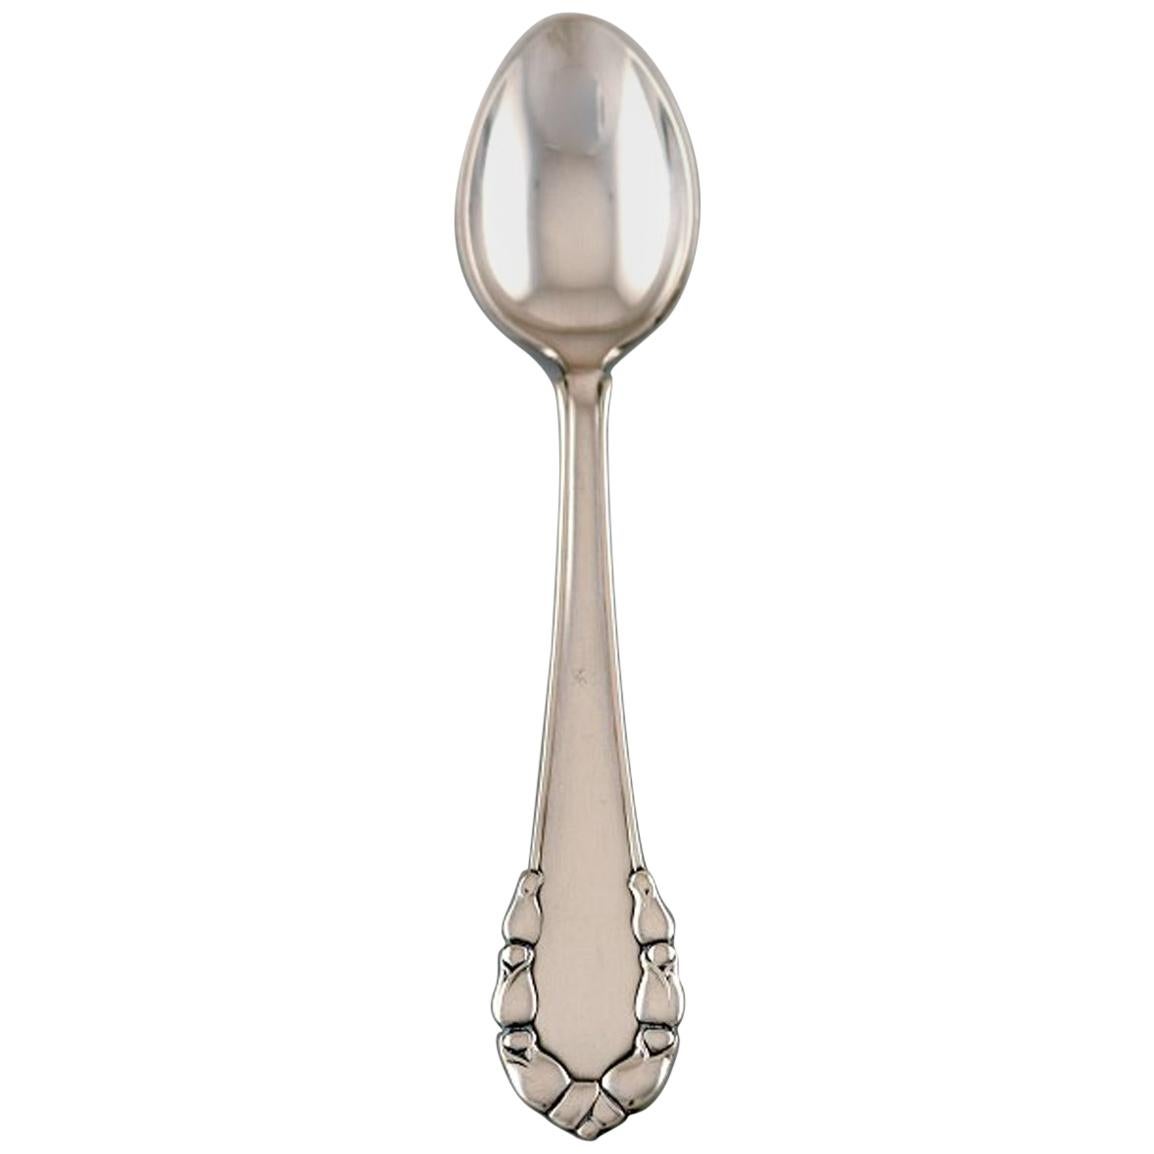 Georg Jensen "Lily of the Valley" Sterling Silver Tea Spoon, 1933-1944, 9 Pieces